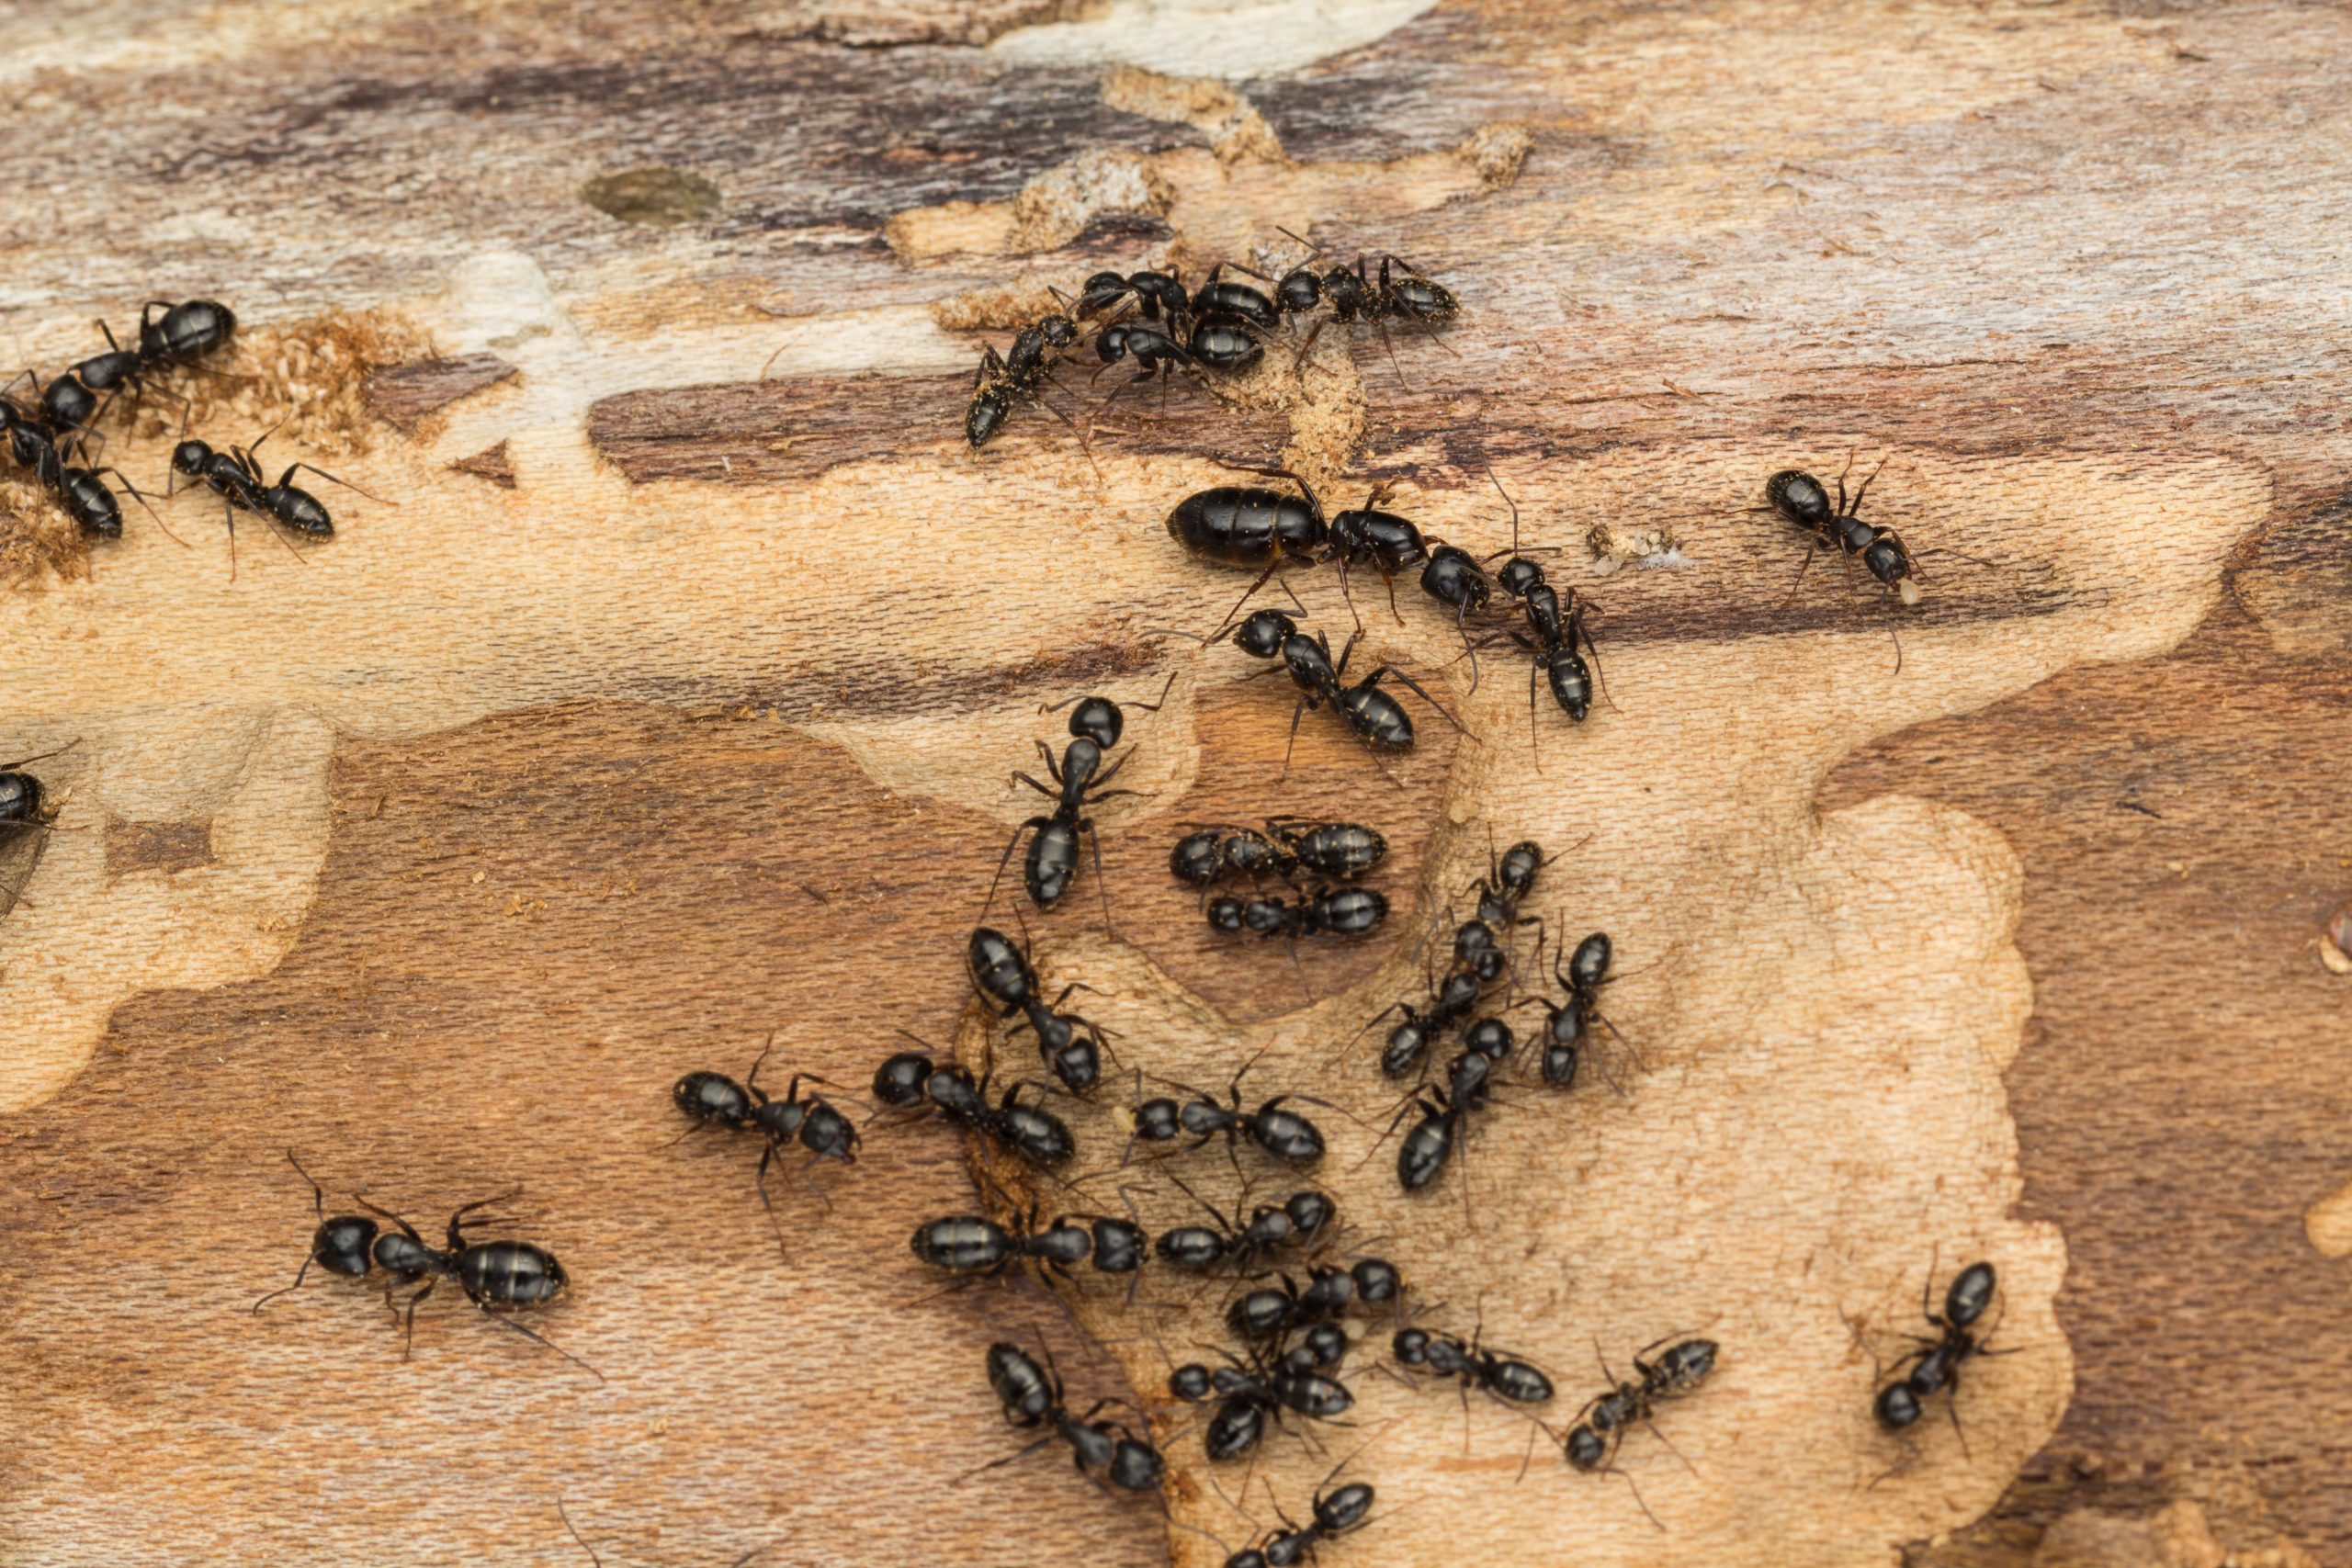 faq - What do pest control companies use for carpenter ants?